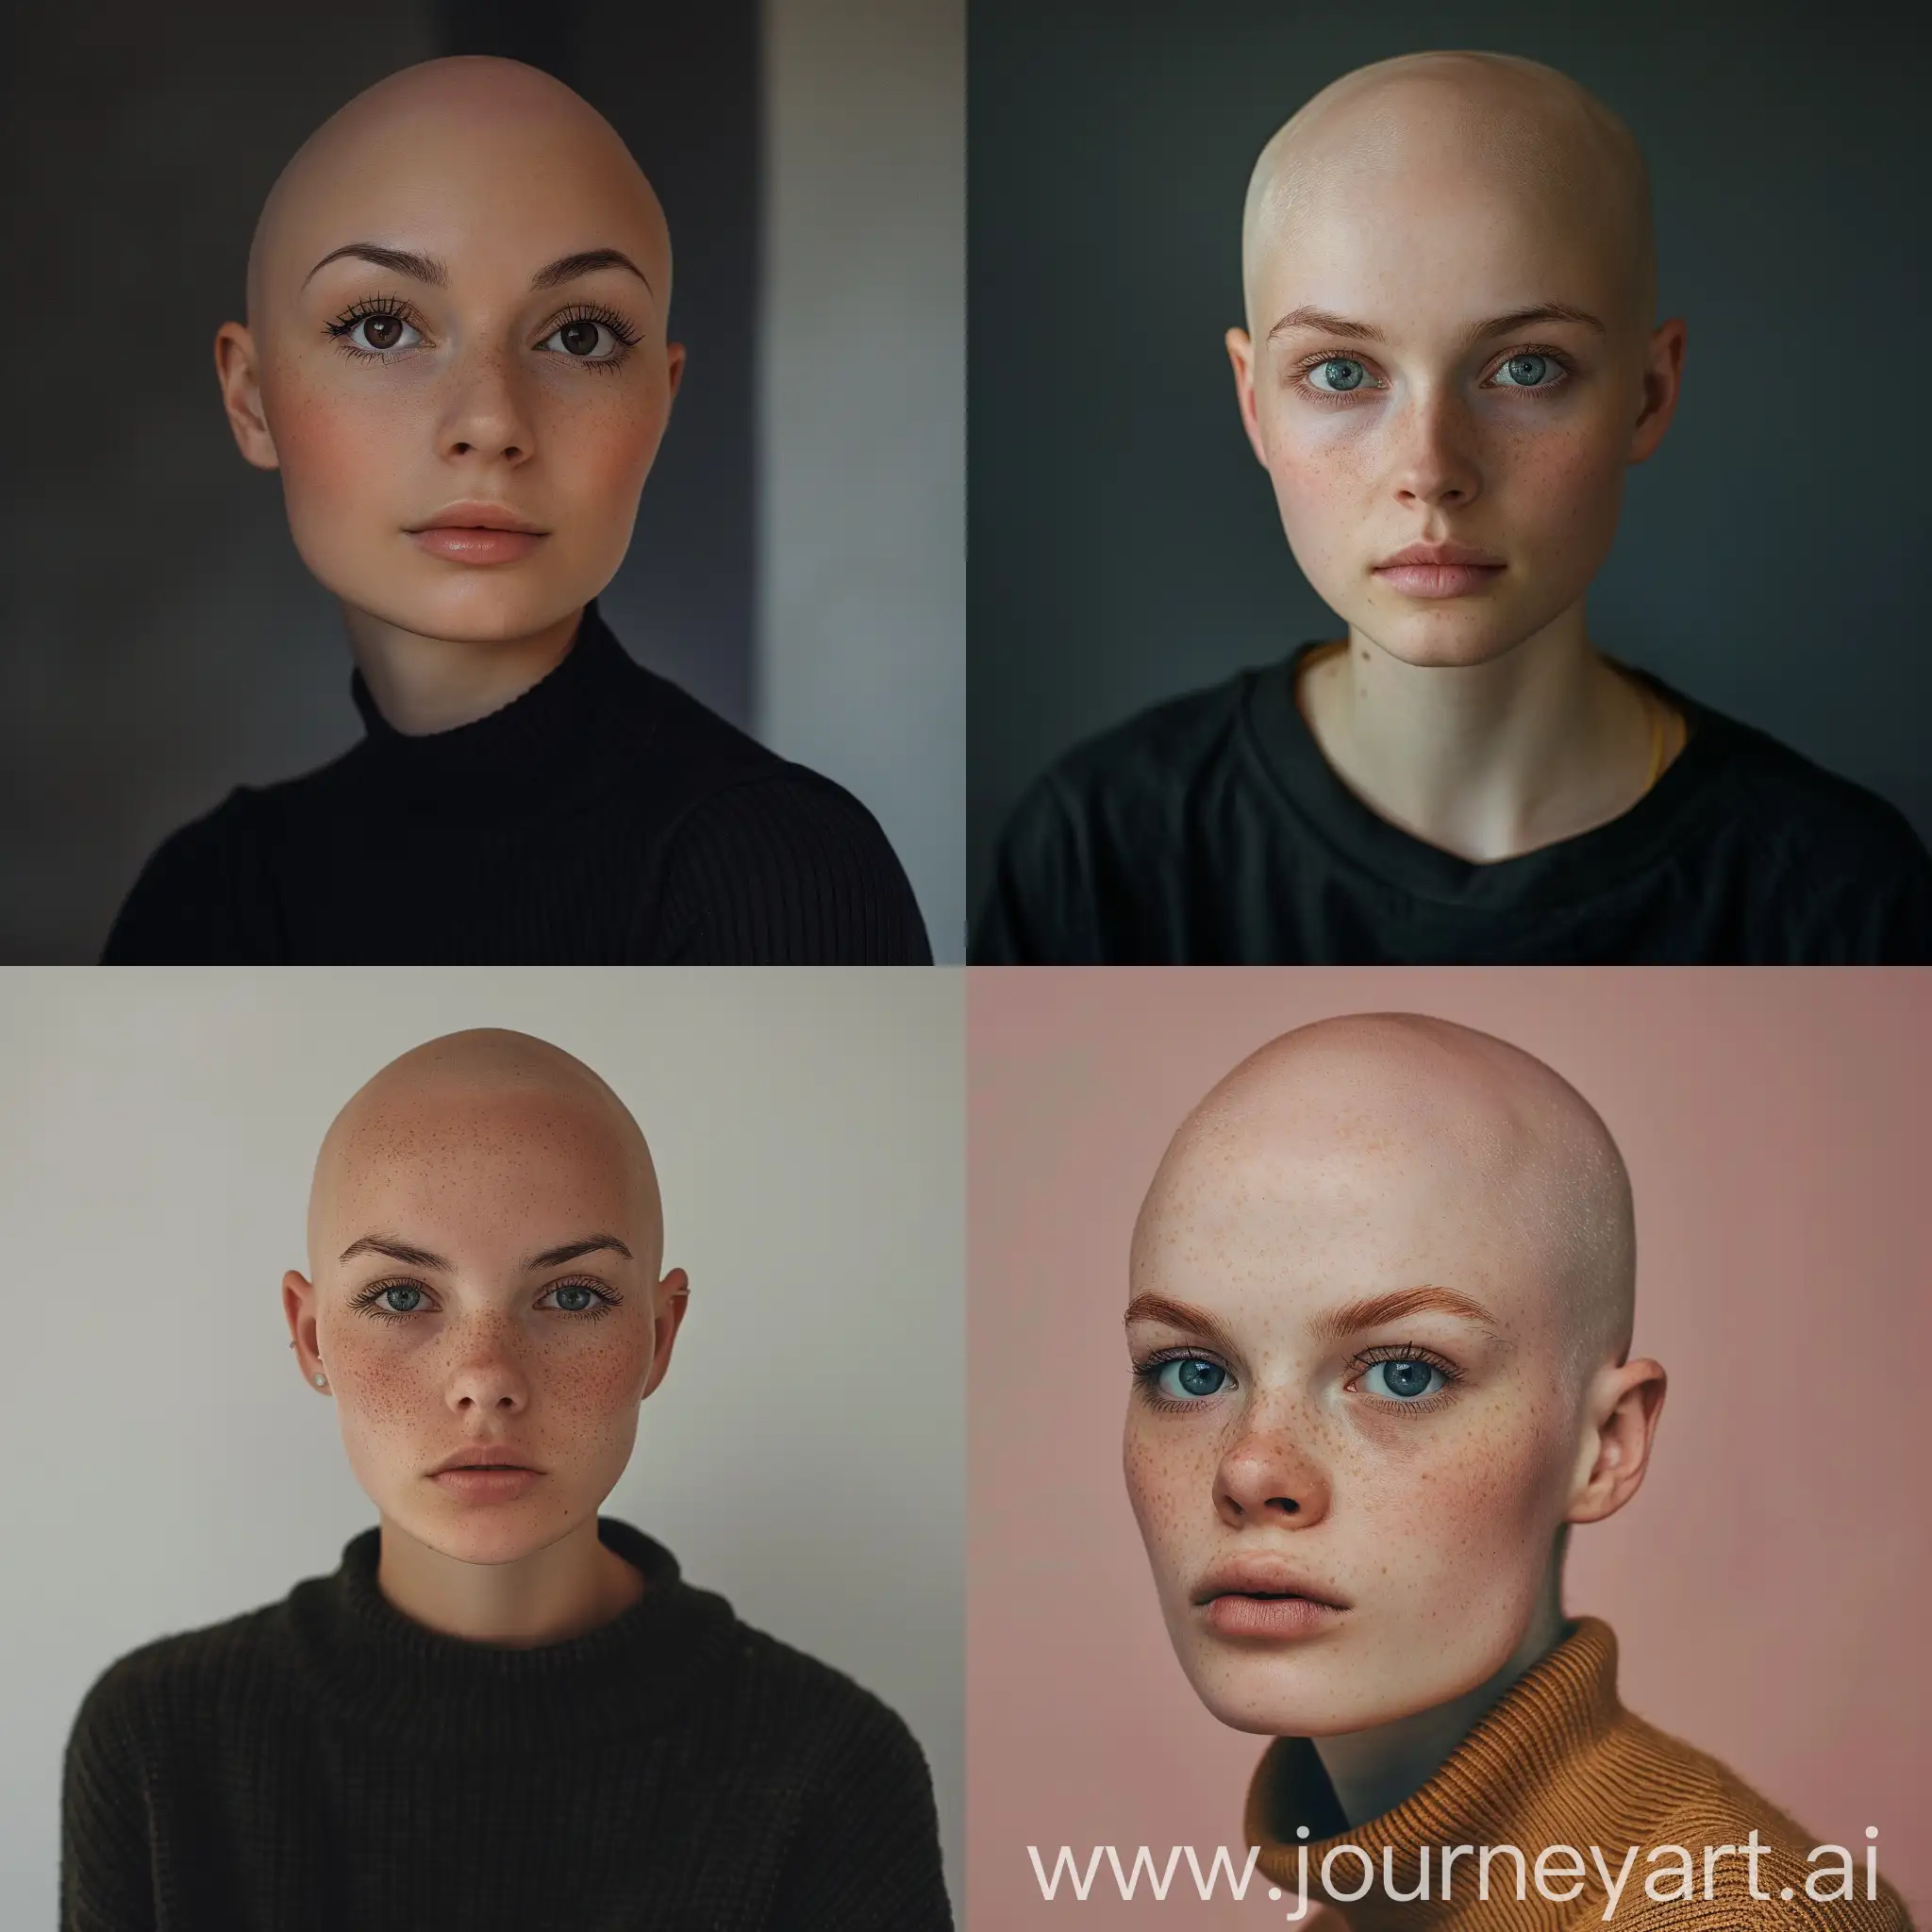 Portrait-of-Bald-Girl-with-Bold-Expression